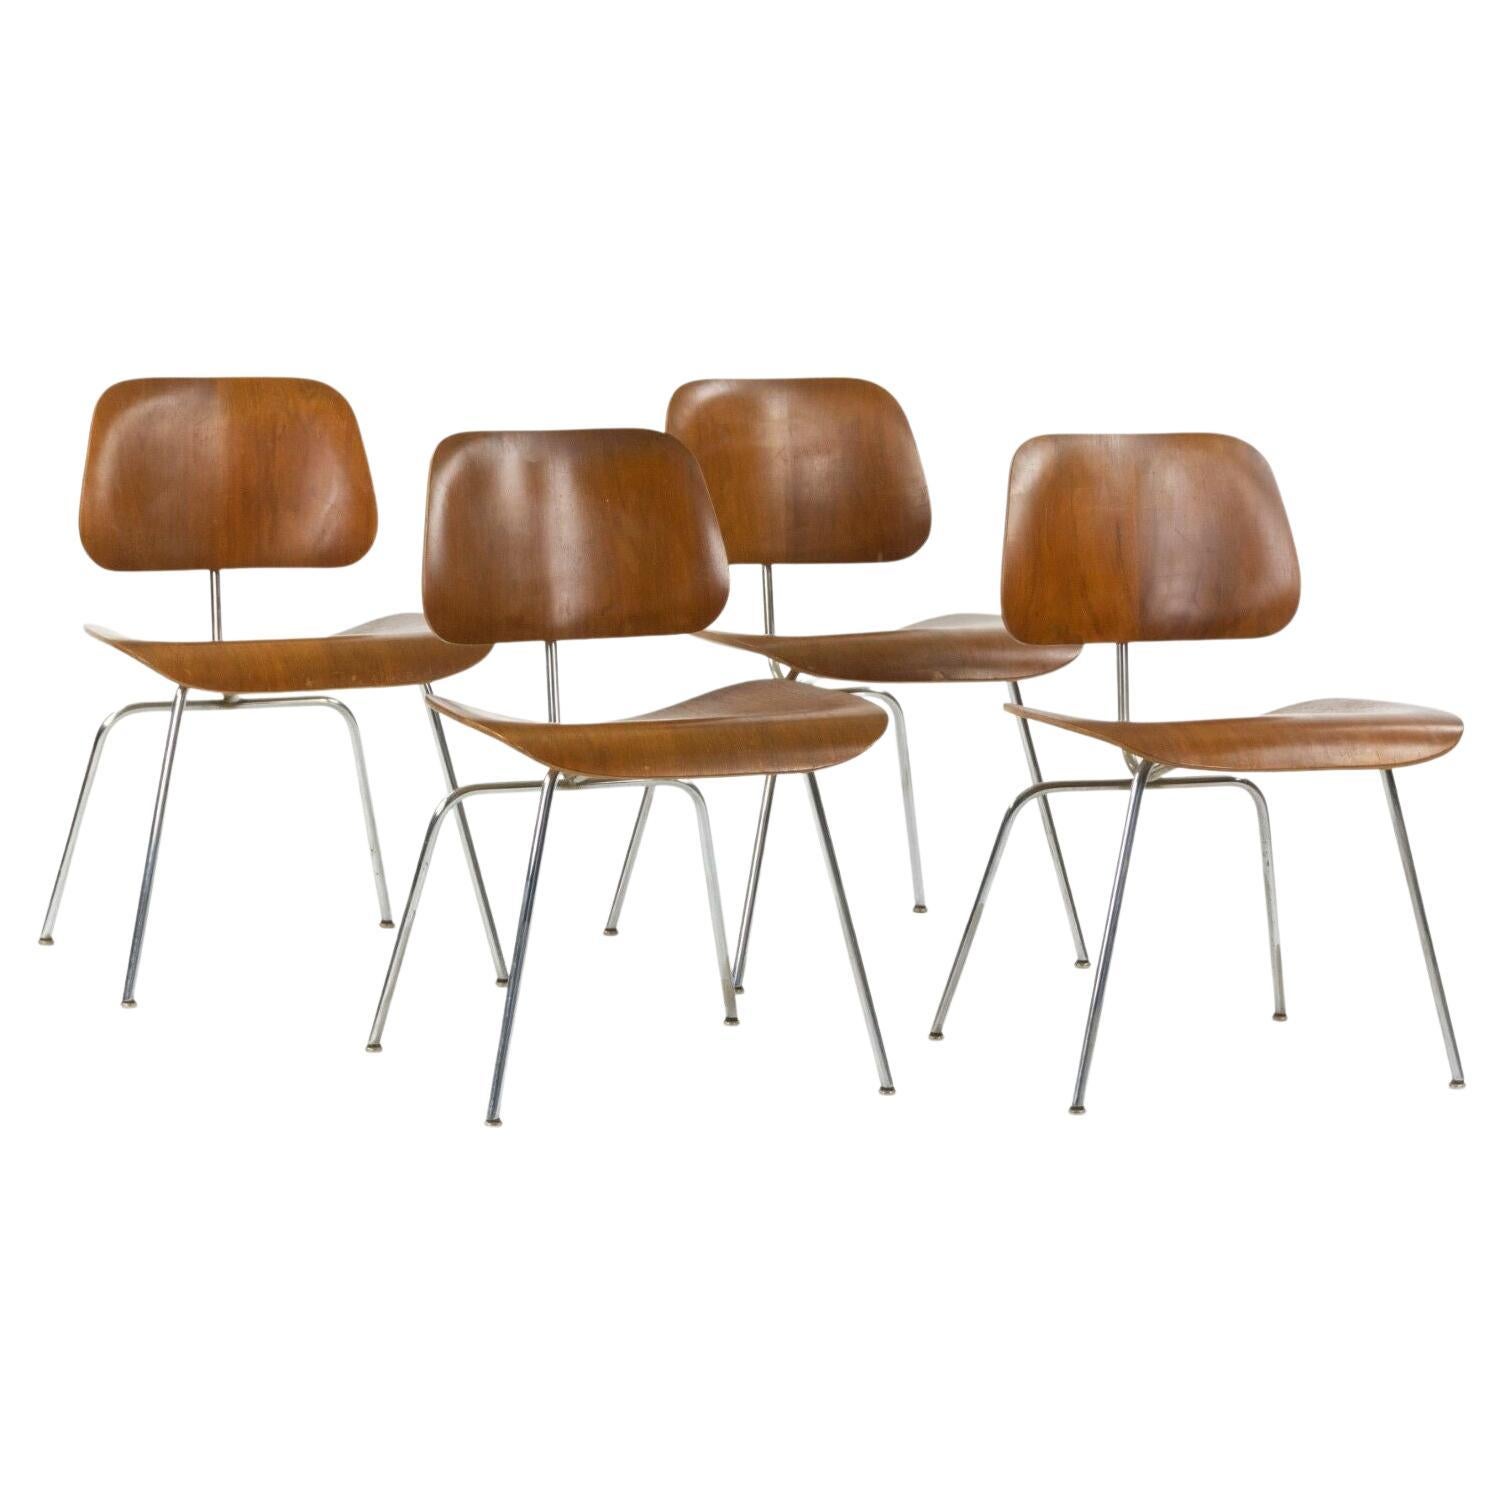 1948 Eames Evans for Herman Miller DCM Dining Chairs Metal in Walnut Set of Four For Sale